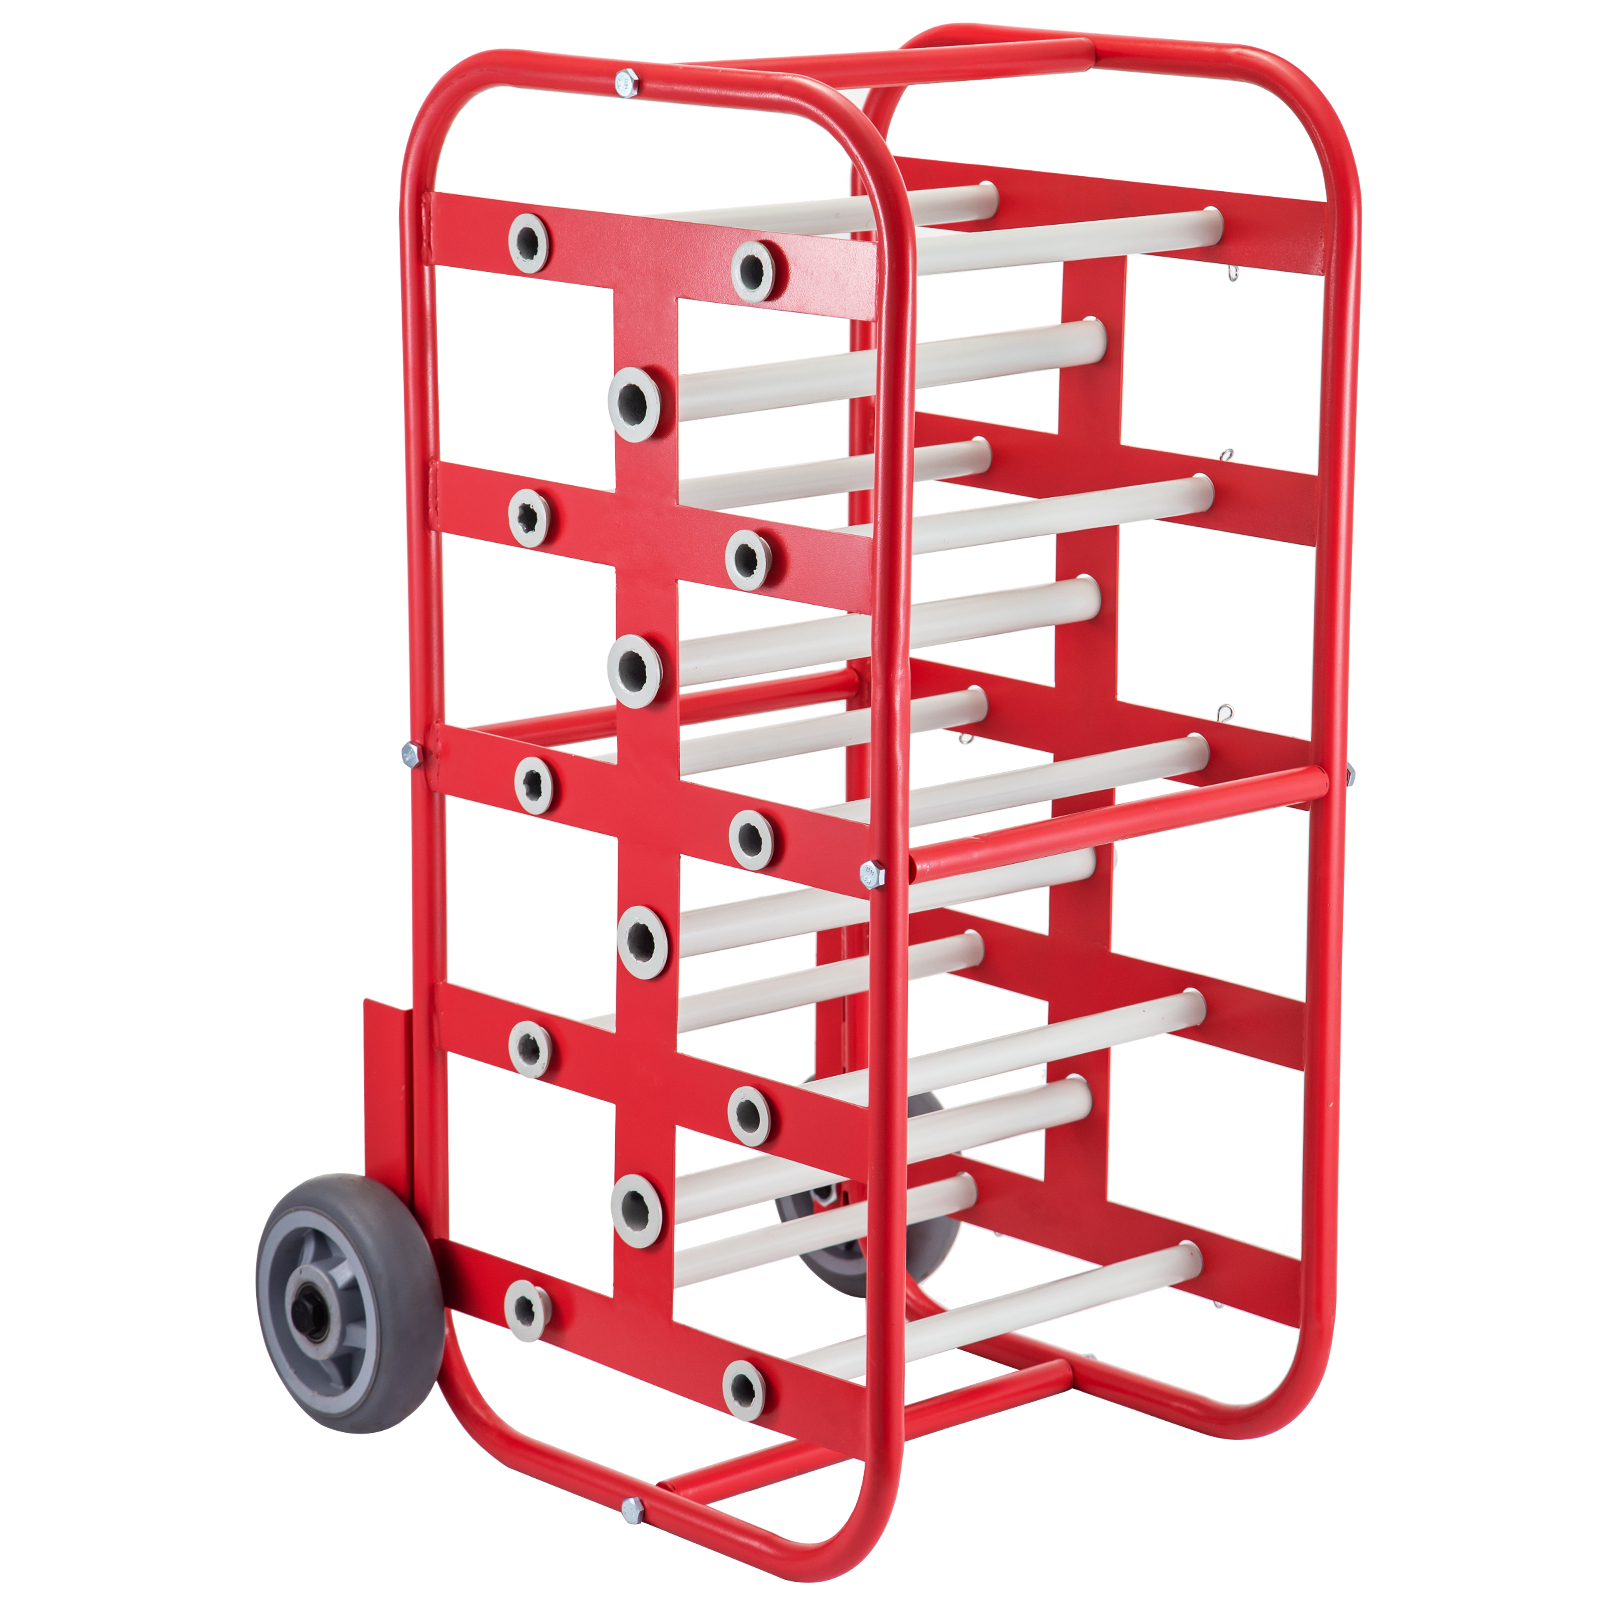 VEVOR Wire Reel Caddy 1Inch & 4/5Inch Axles Wire Spool Rack 43Inch x15Inch x17Inch Wire Caddy Multiple Axles Cable Spool Holder & Dispenser Wire